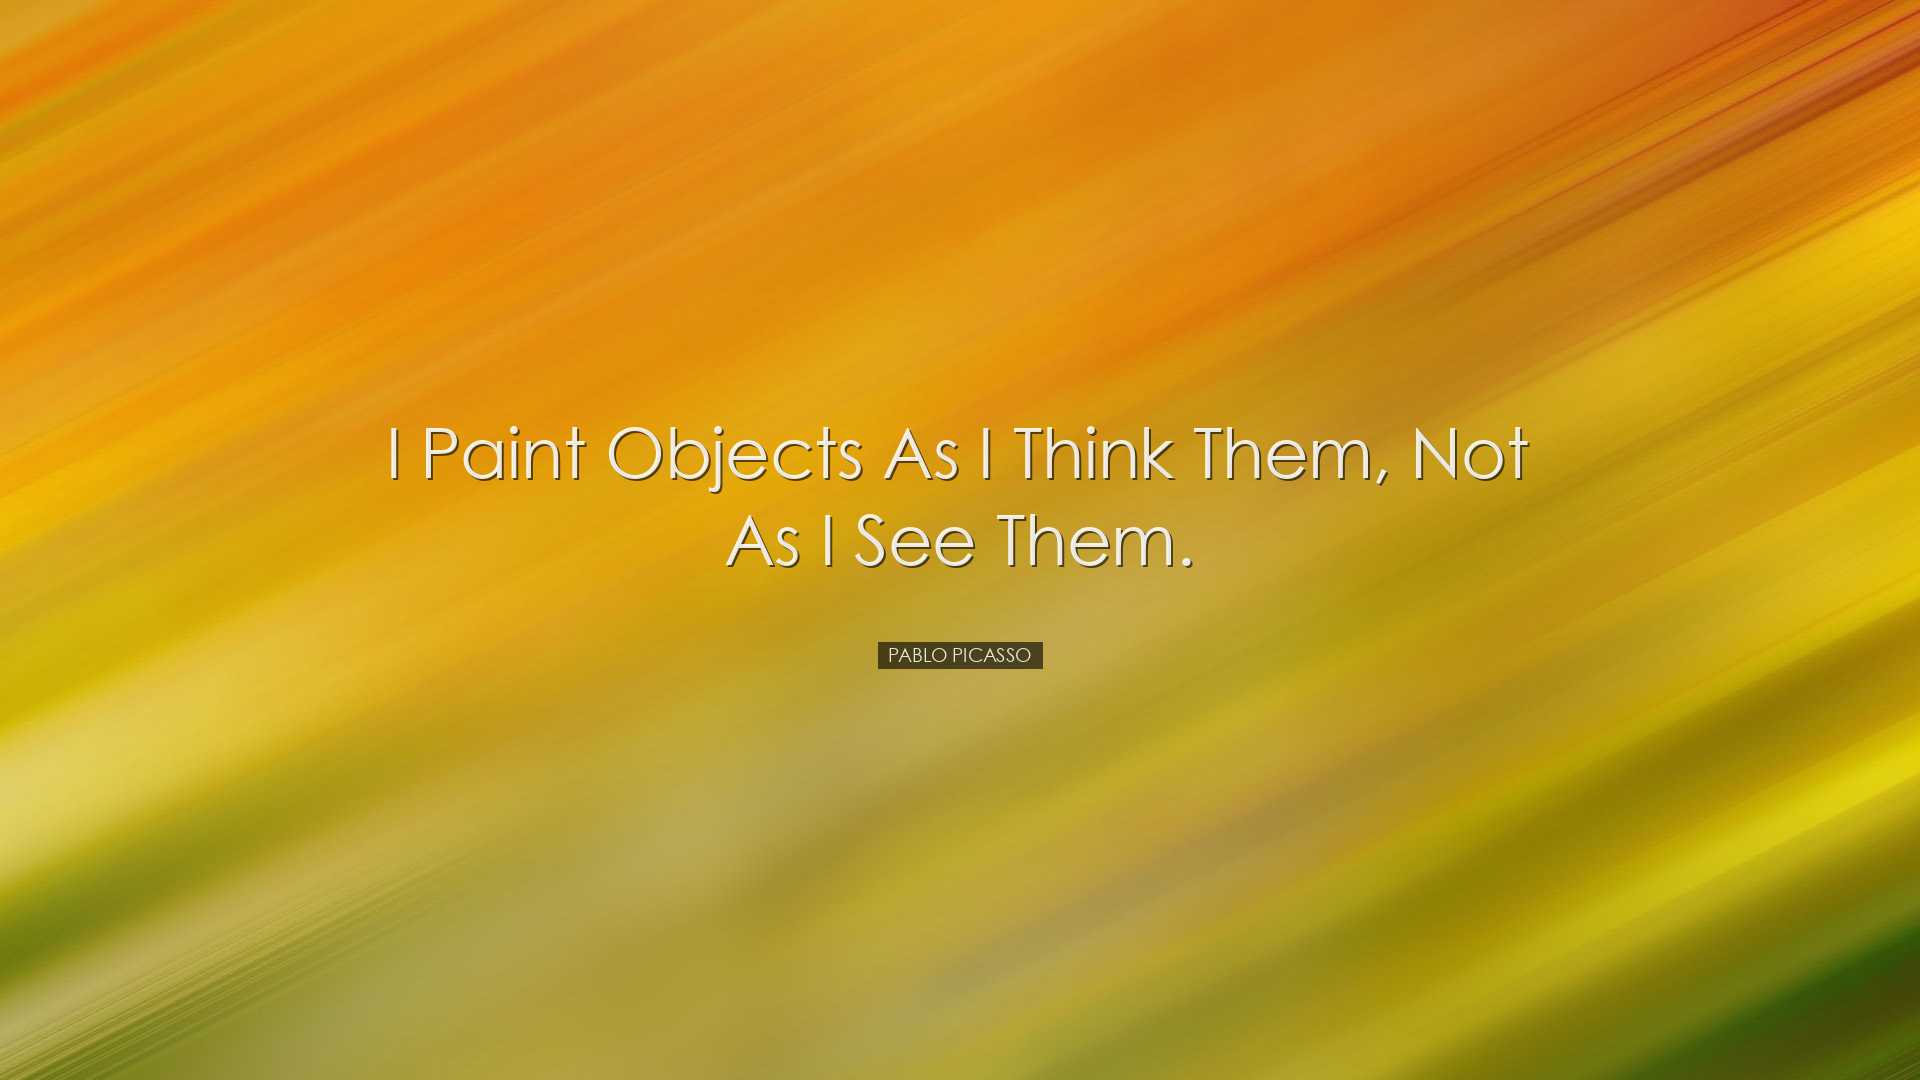 I paint objects as I think them, not as I see them. - Pablo Picass